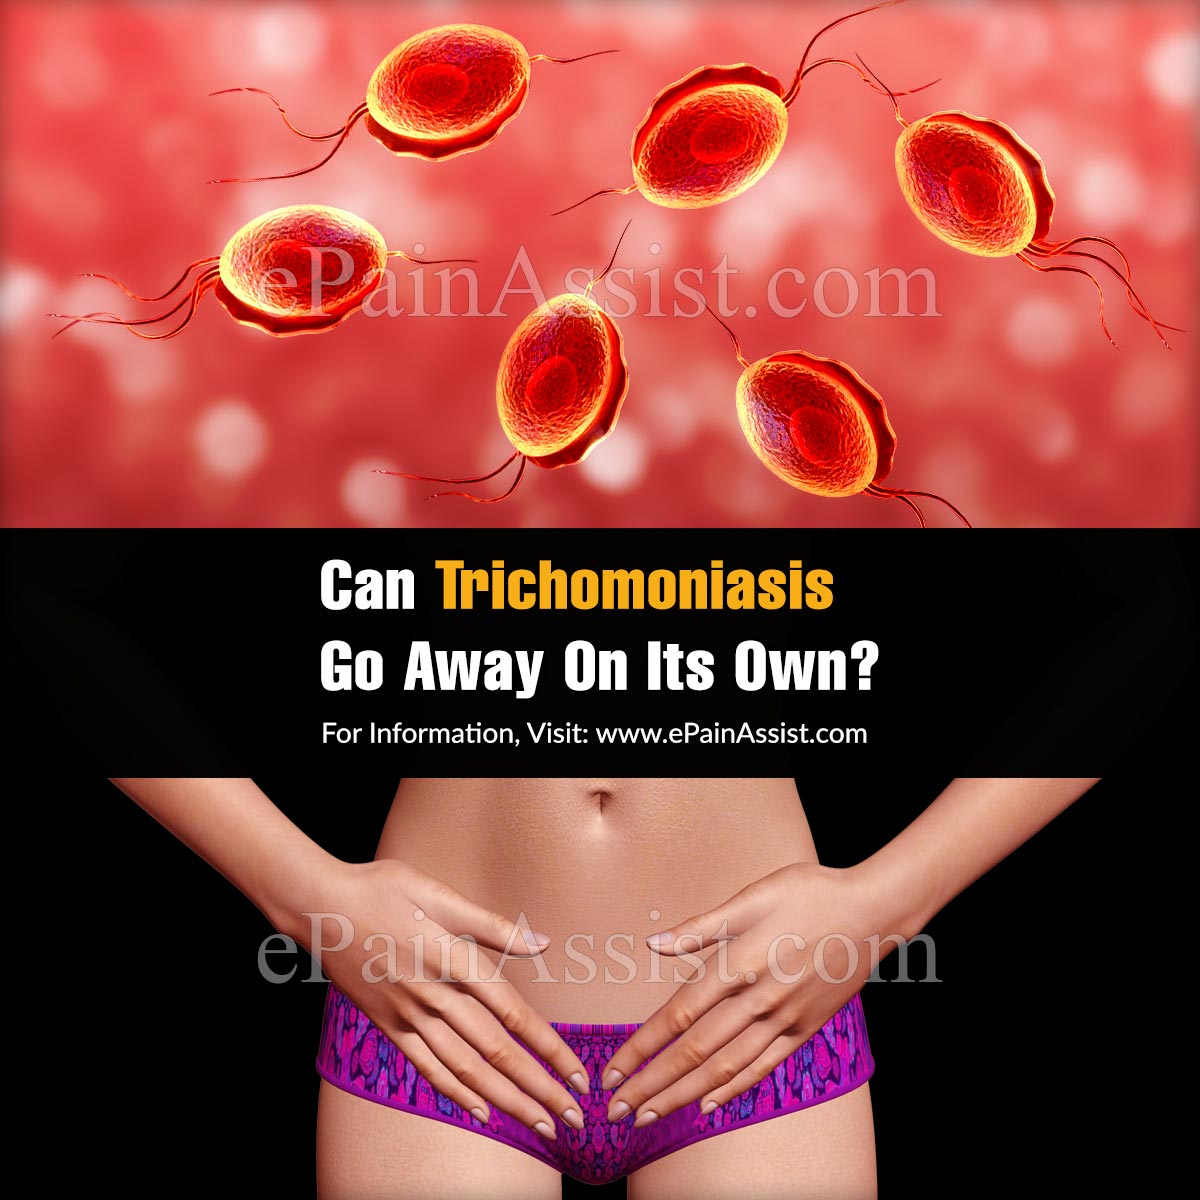 Can Trichomoniasis Go Away On Its Own?